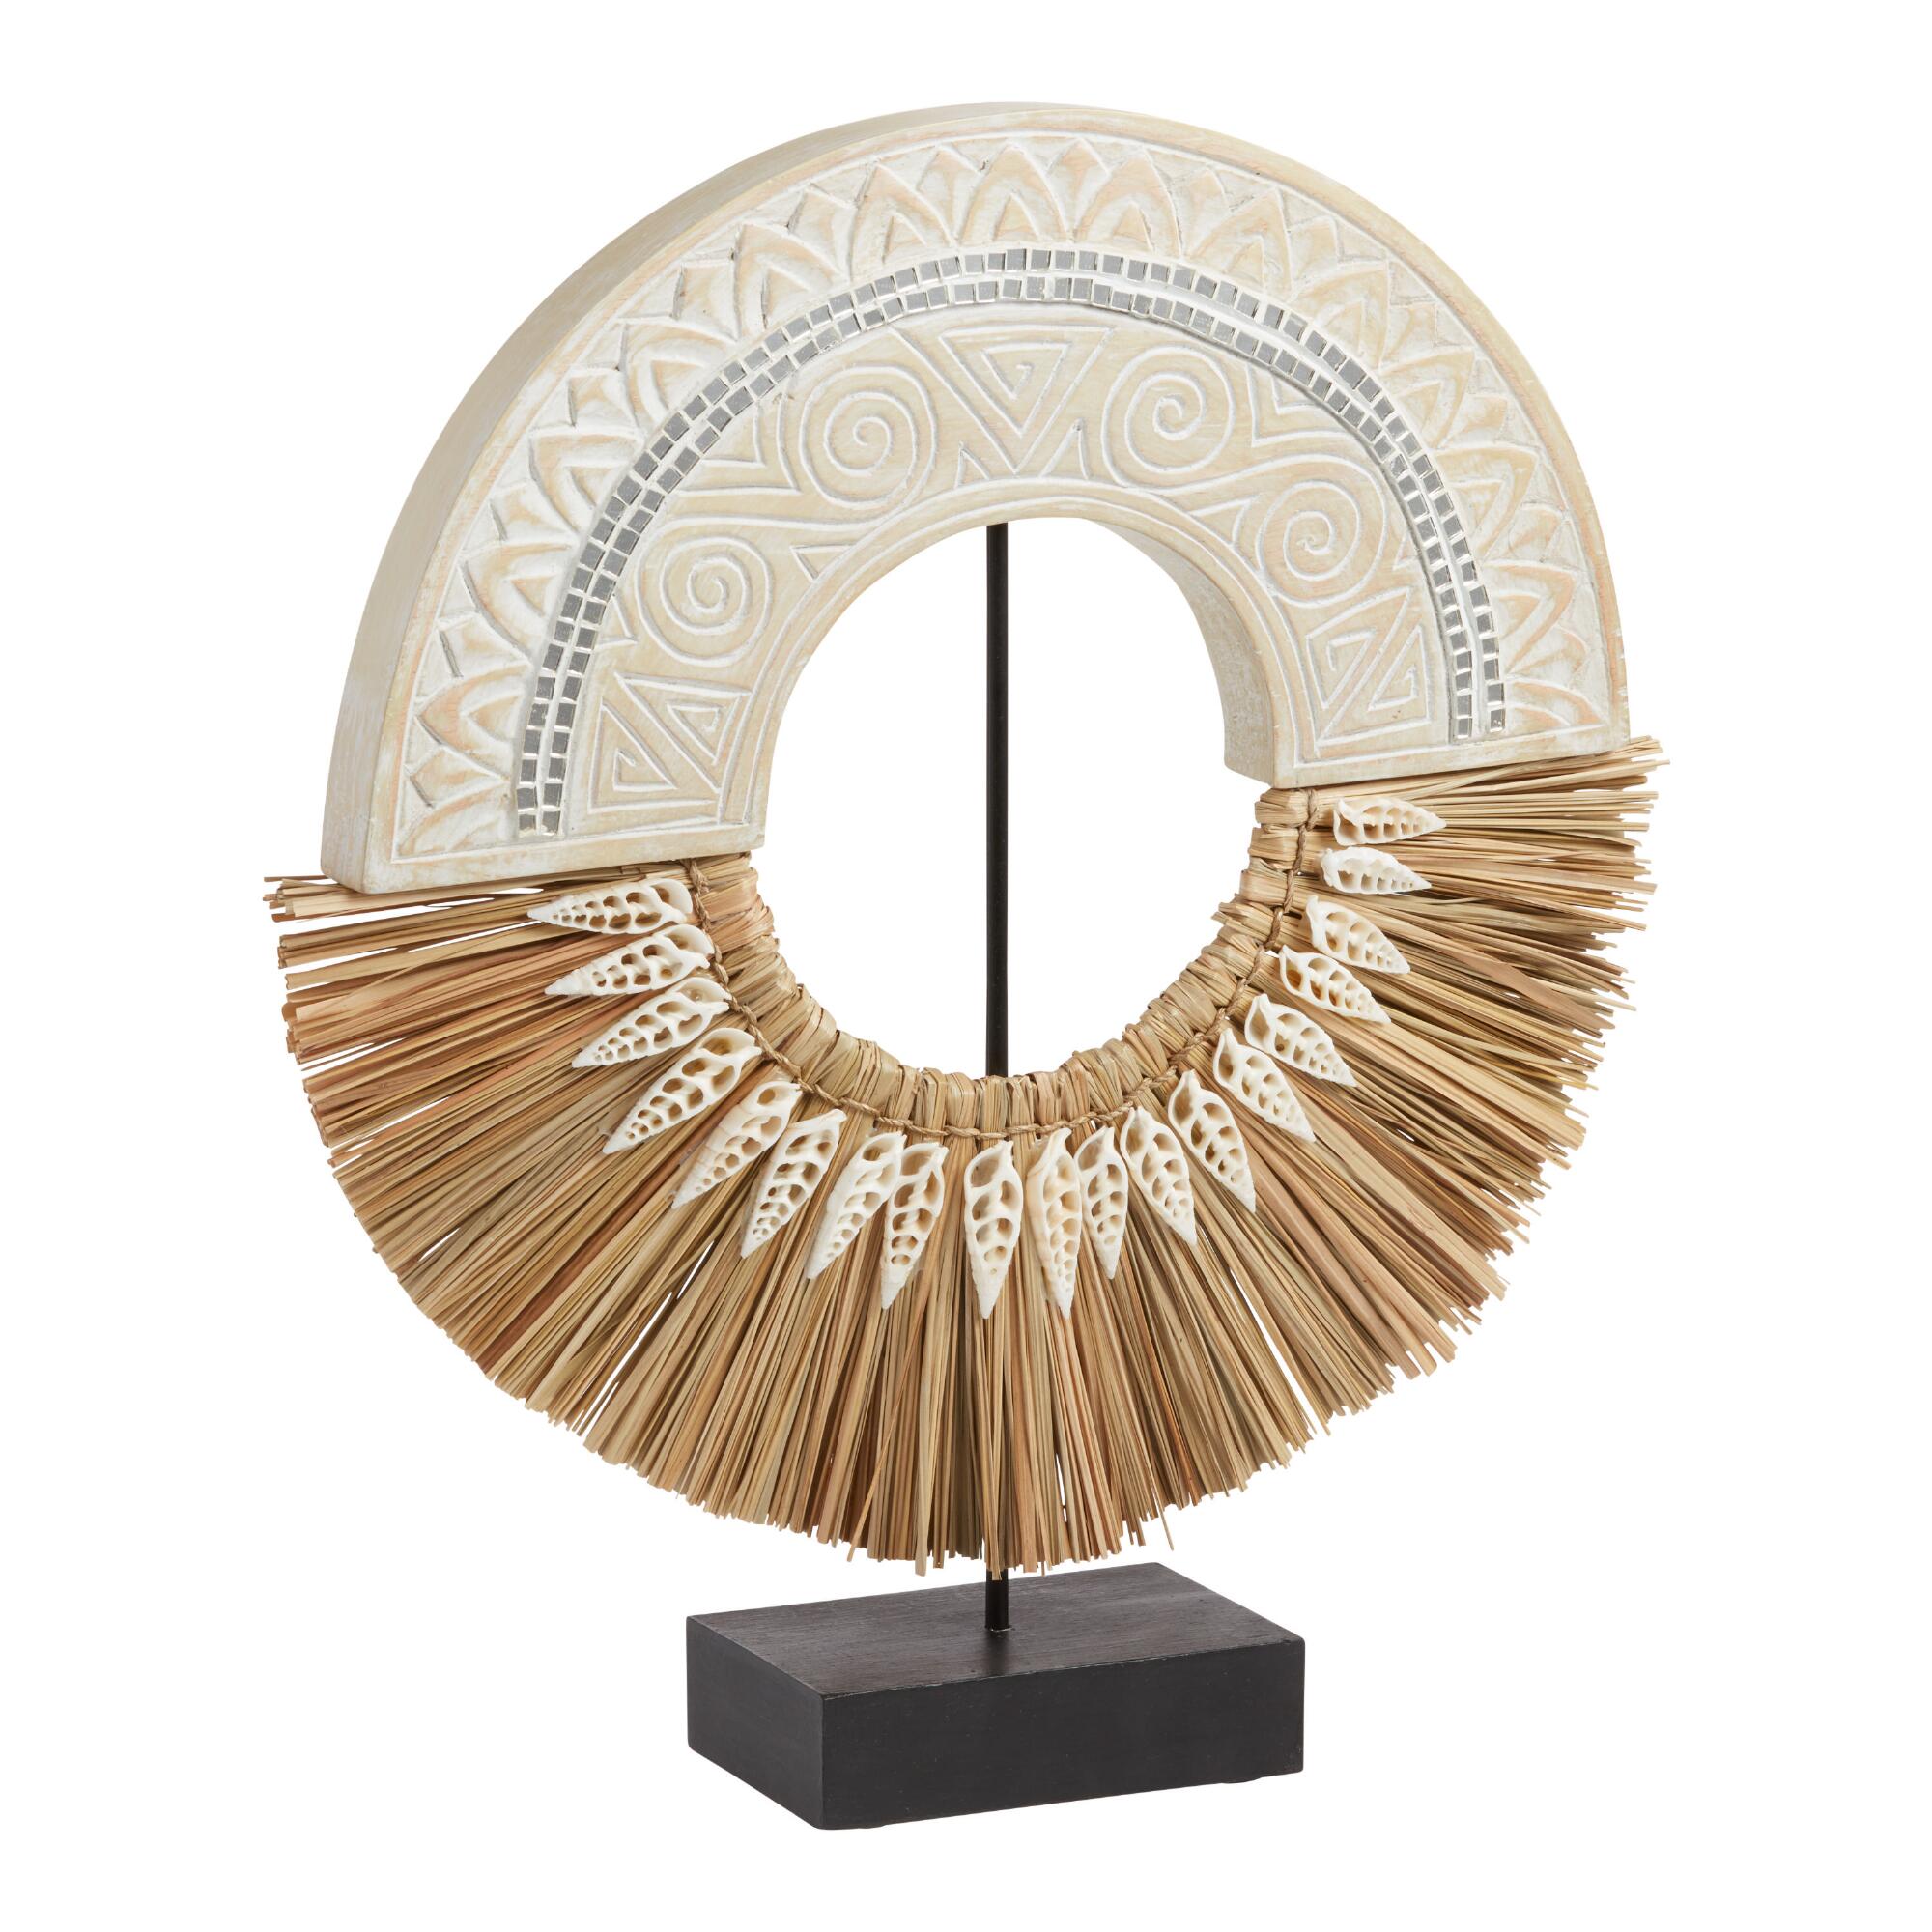 Carved Wood and Grass Ring Decor on Stand: White/Natural by World Market